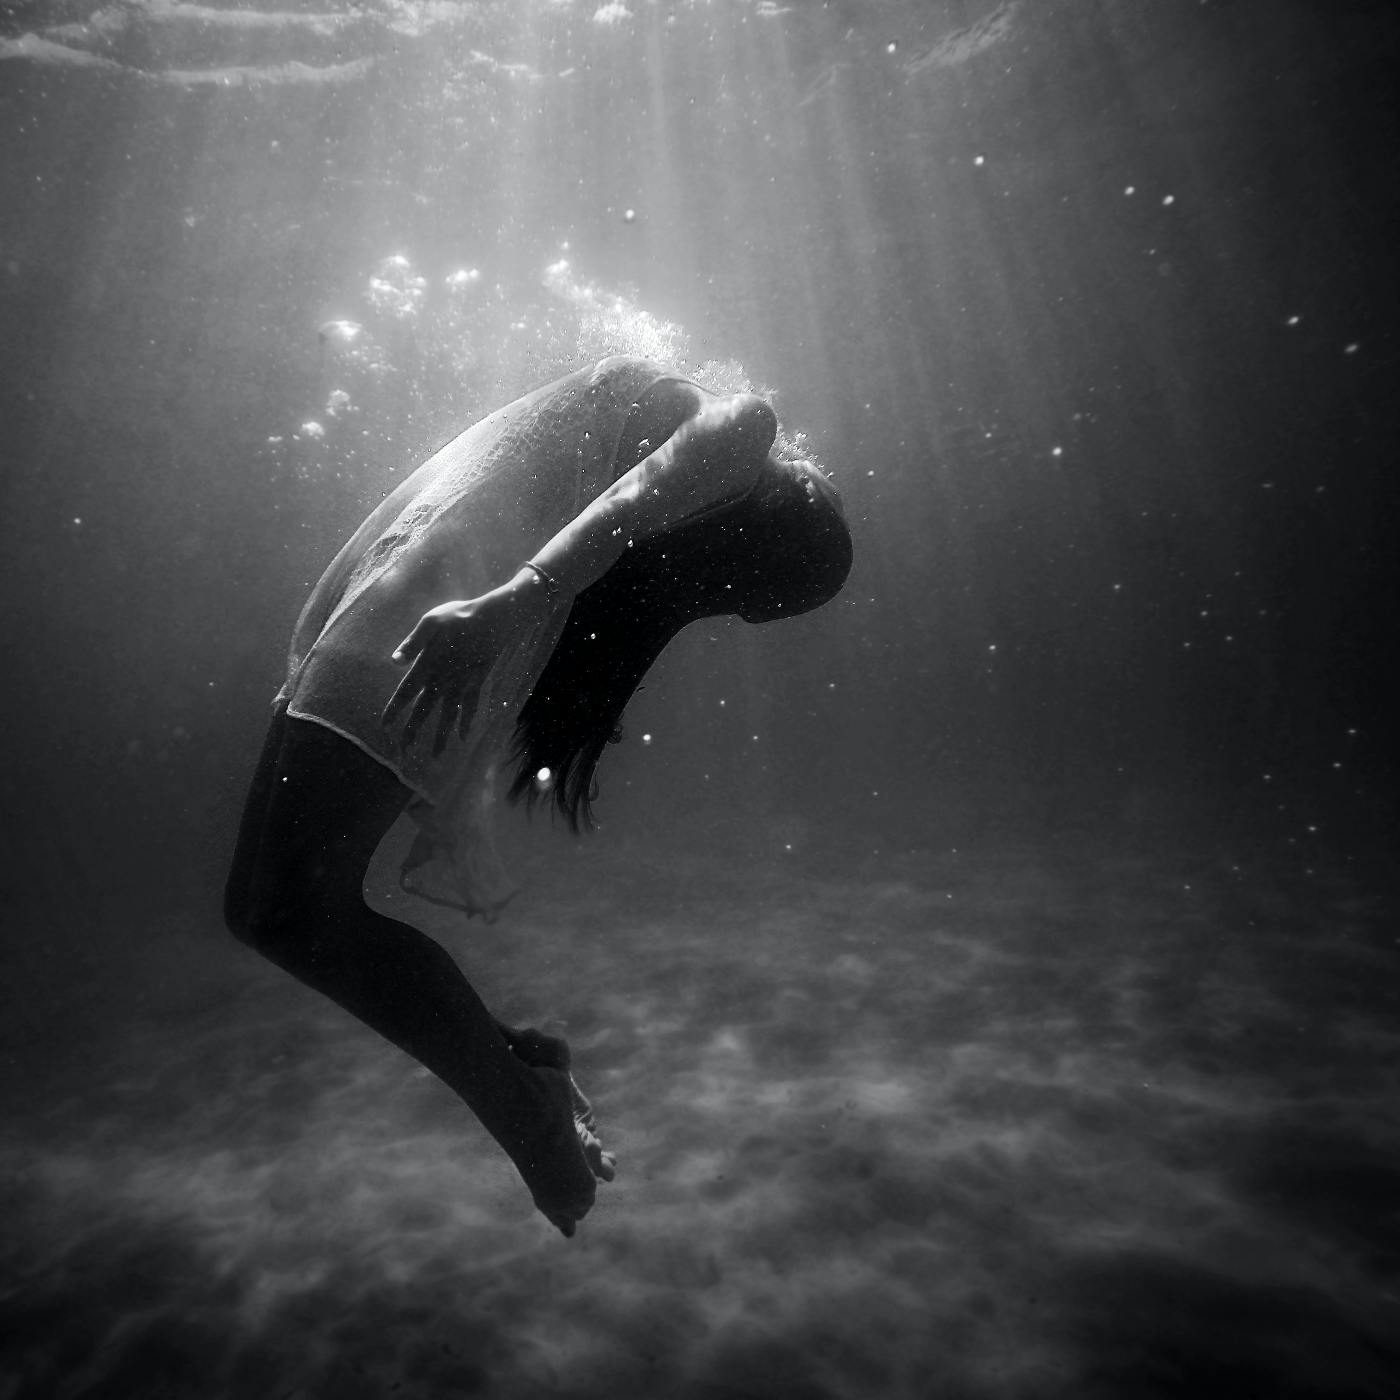 A woman in a white shift underwater